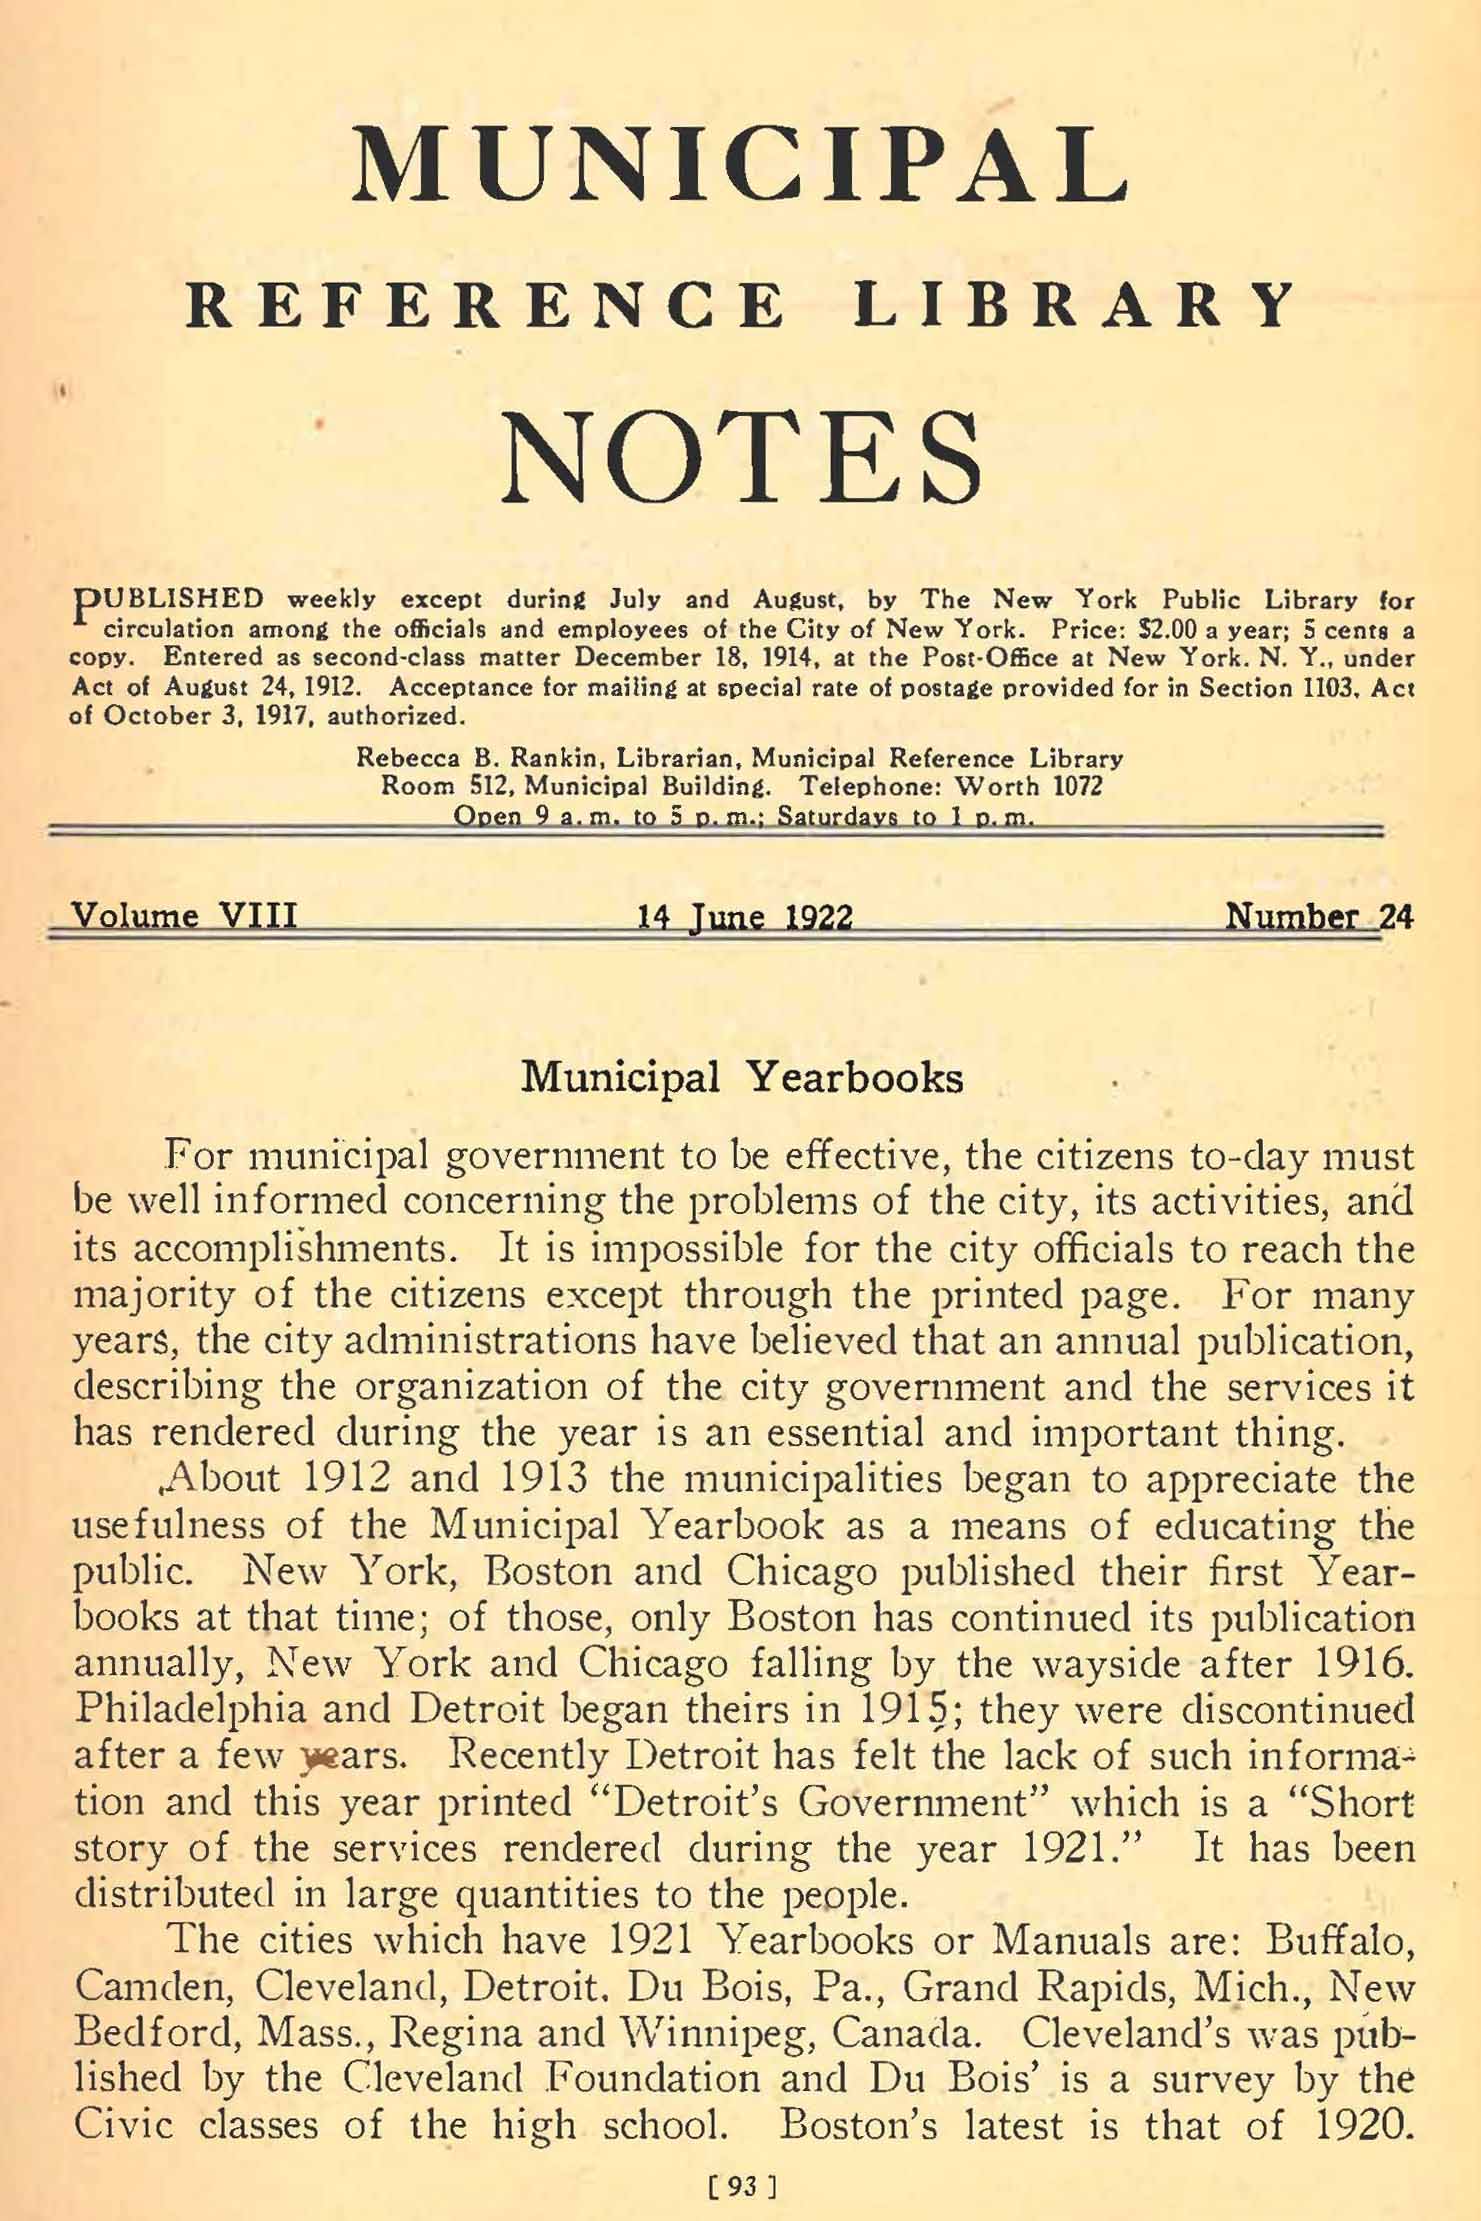 A page from the Municipal Library Notes; Text naming New York, Boston, Chicago, Philadelphia and Detroit as early adopters of the Municipal Year Book.